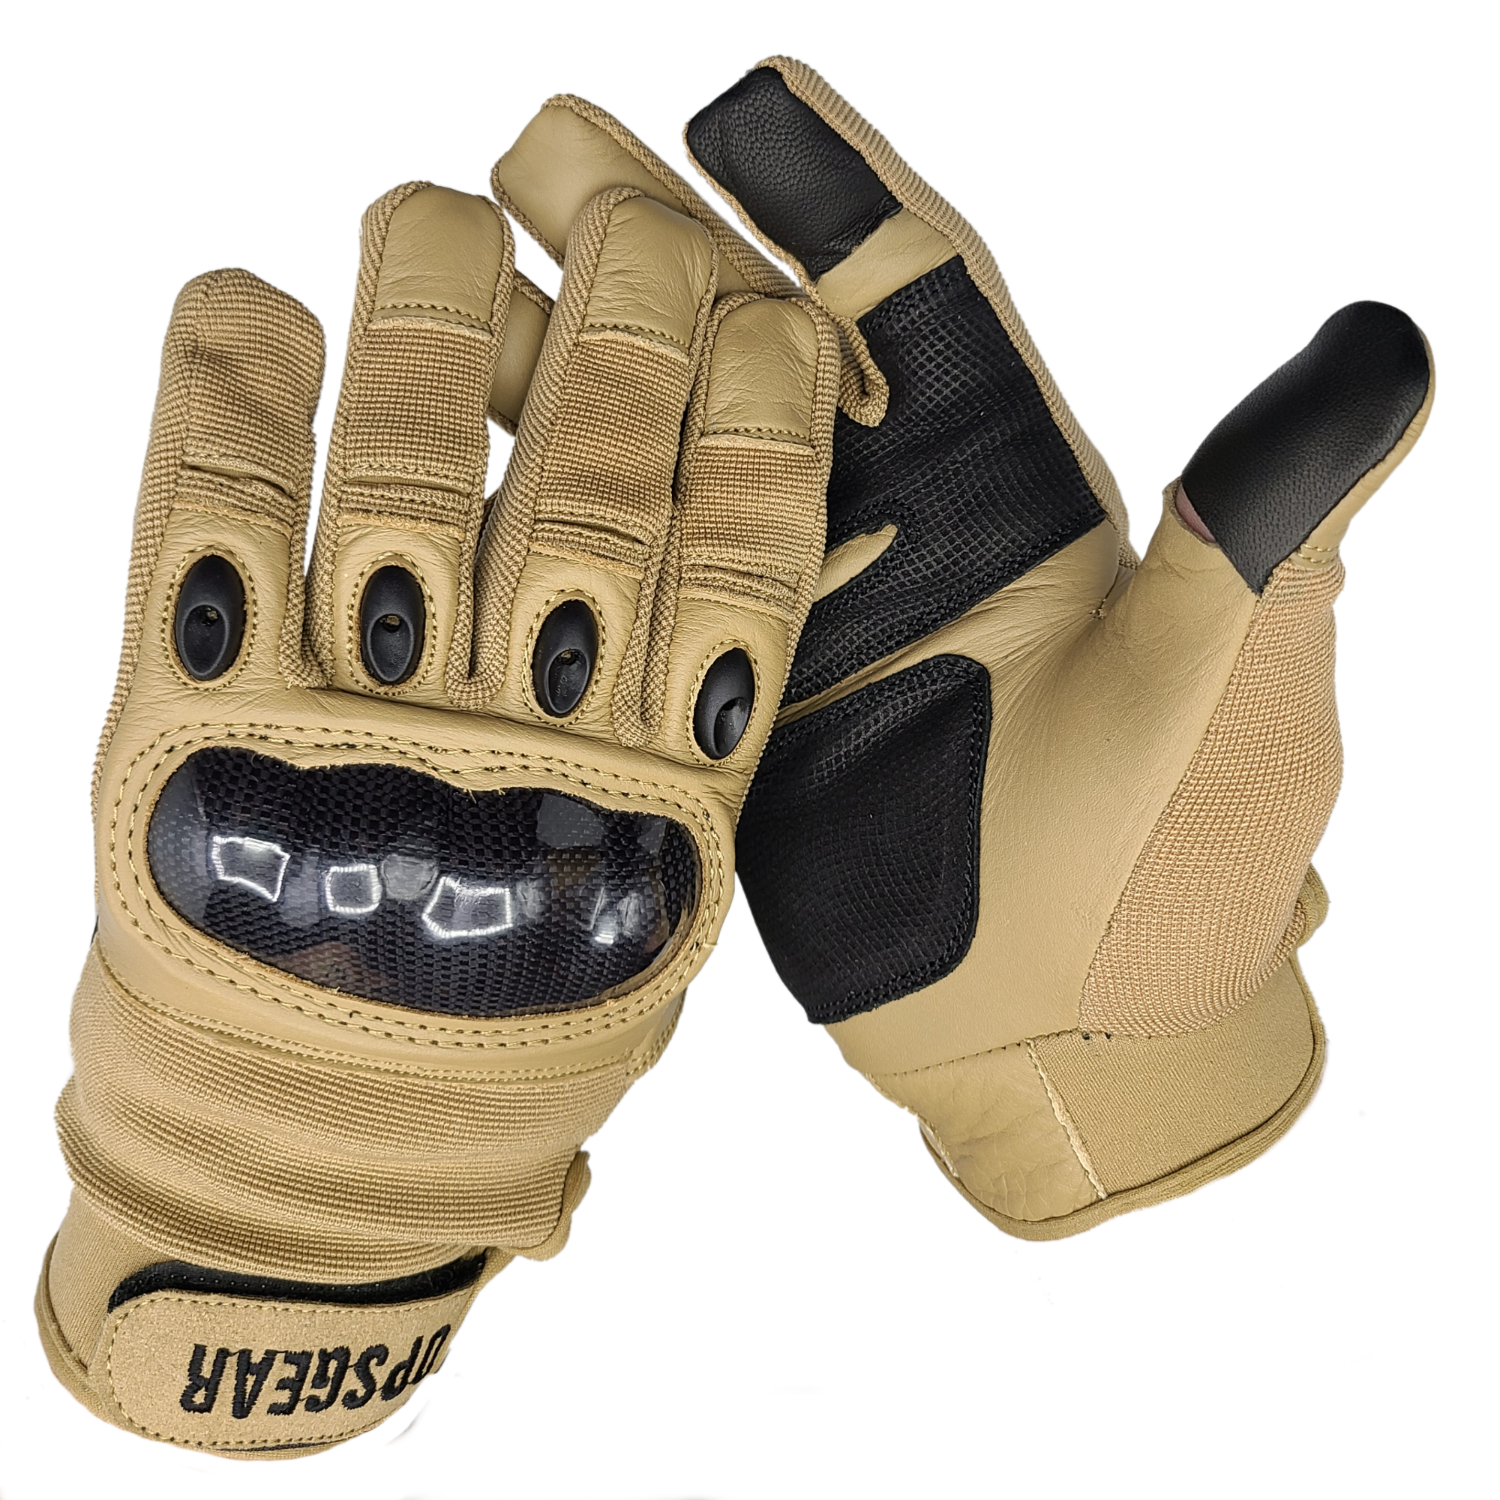 Tactical, Leather gloves